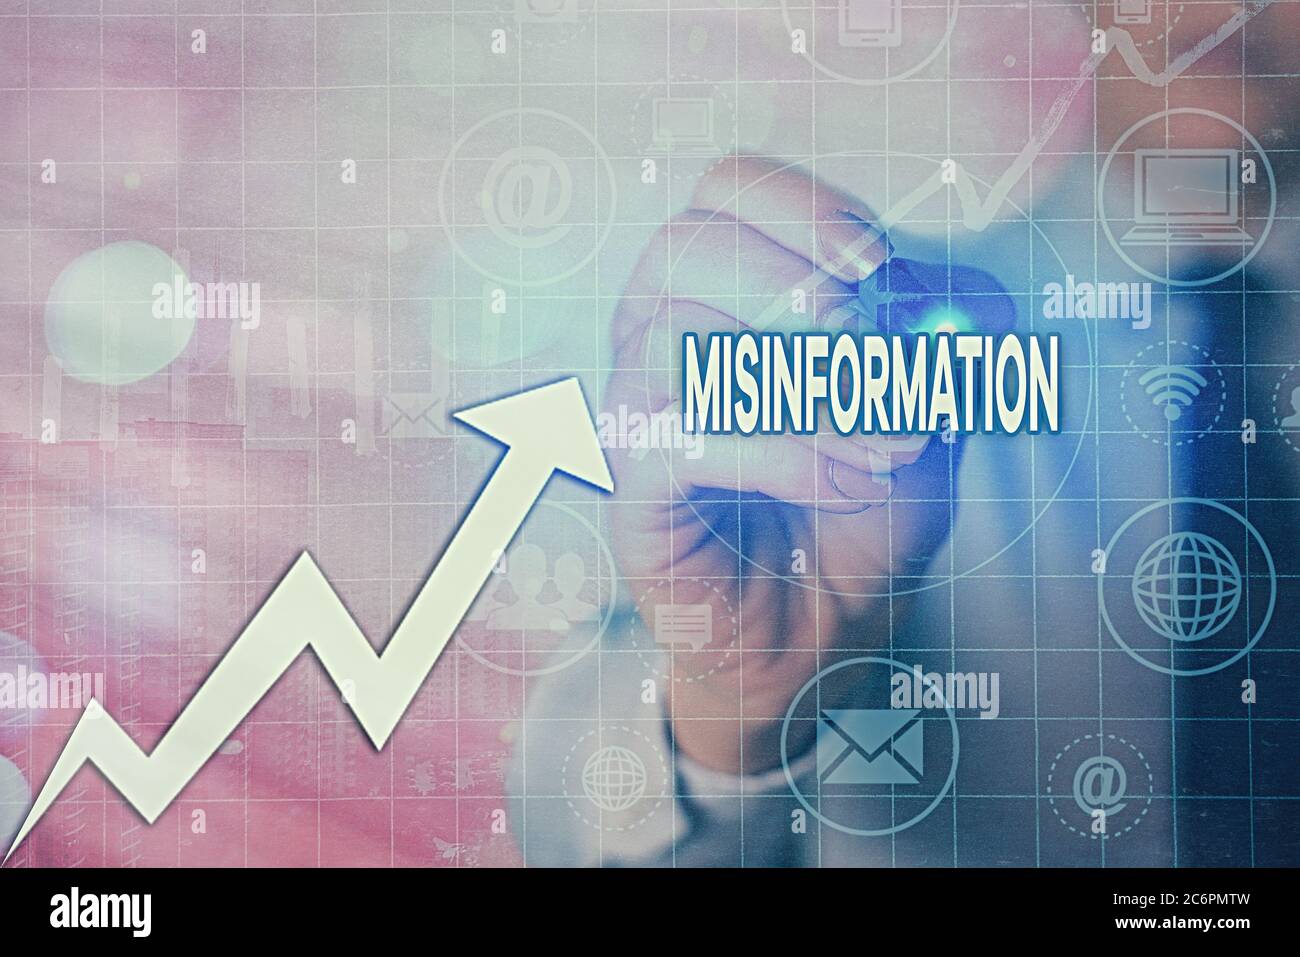 Writing note showing Misinformation. Business concept for false data, in particular, intended intentionally to deceive Arrow symbol going upward showi Stock Photo